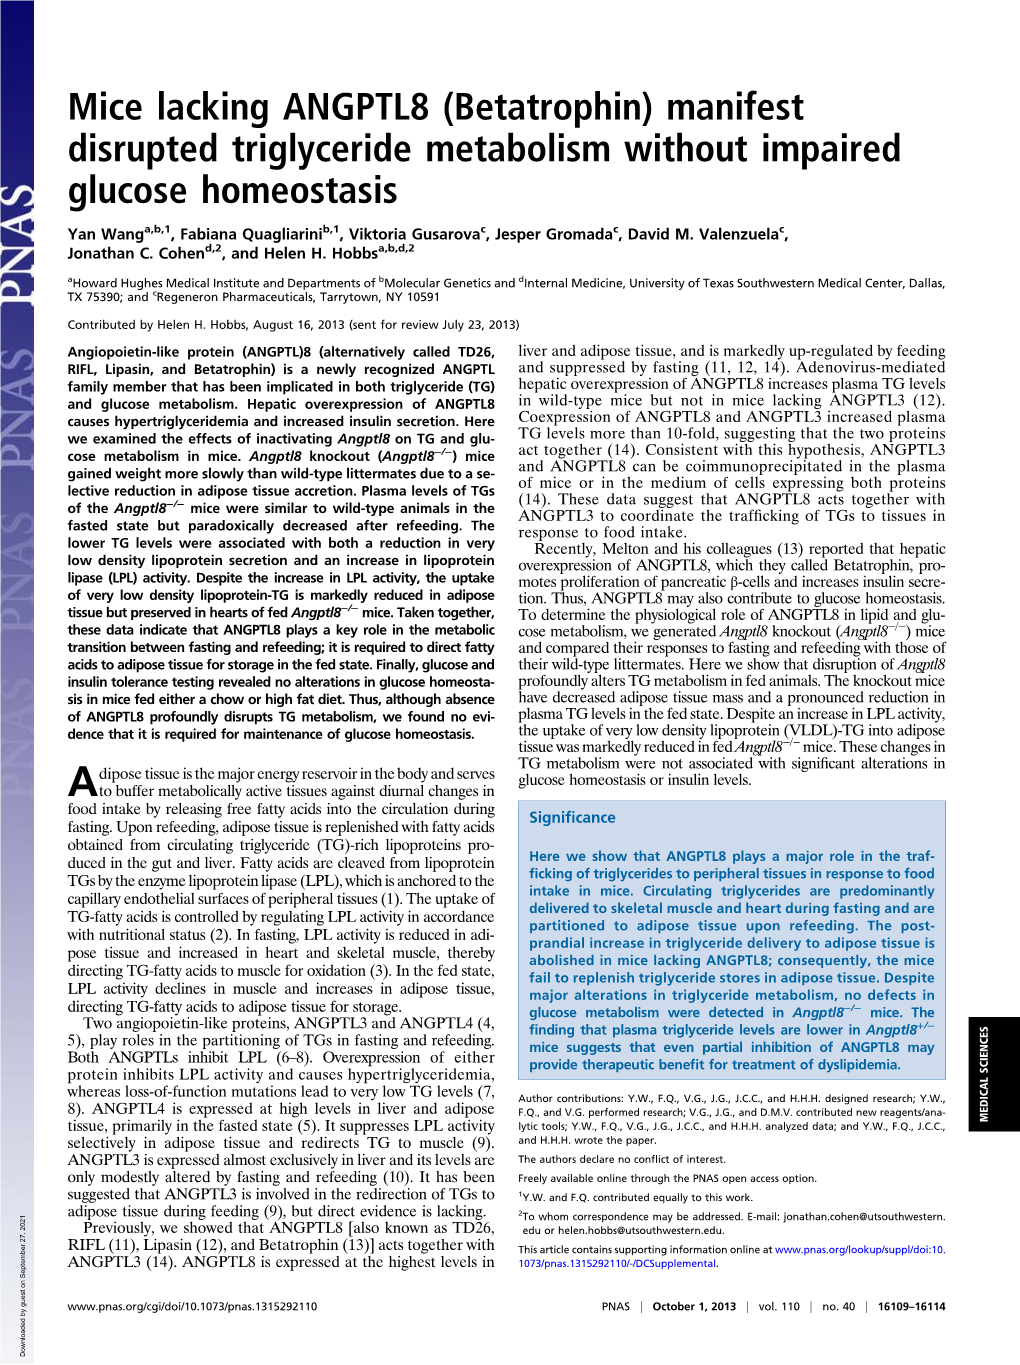 Manifest Disrupted Triglyceride Metabolism Without Impaired Glucose Homeostasis